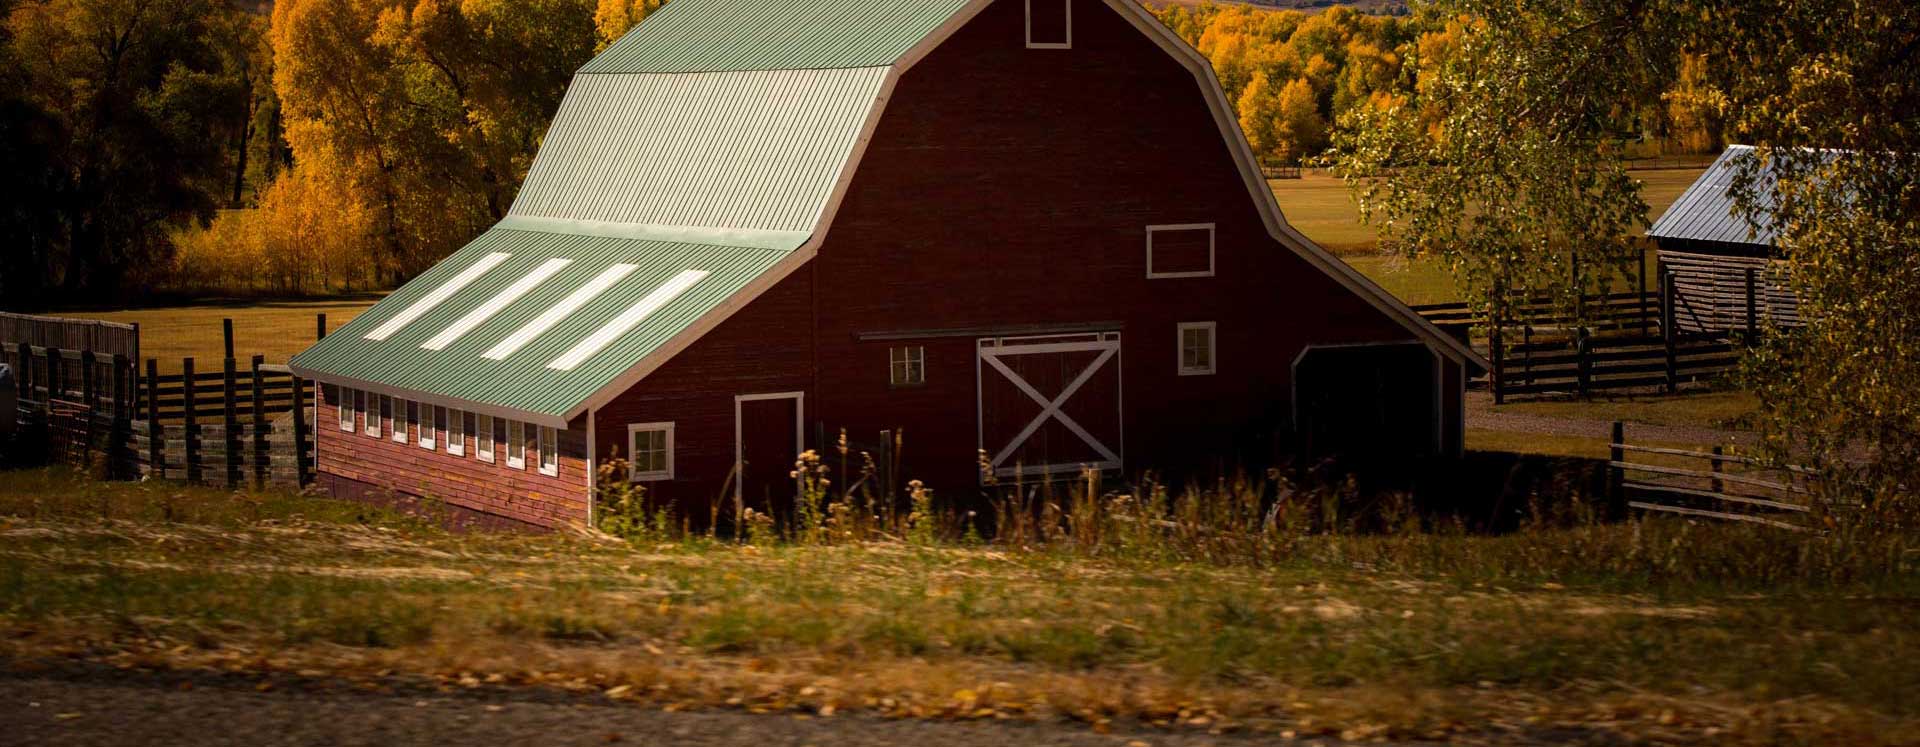 red barn with green roof surrounded with trees in the distance during fall